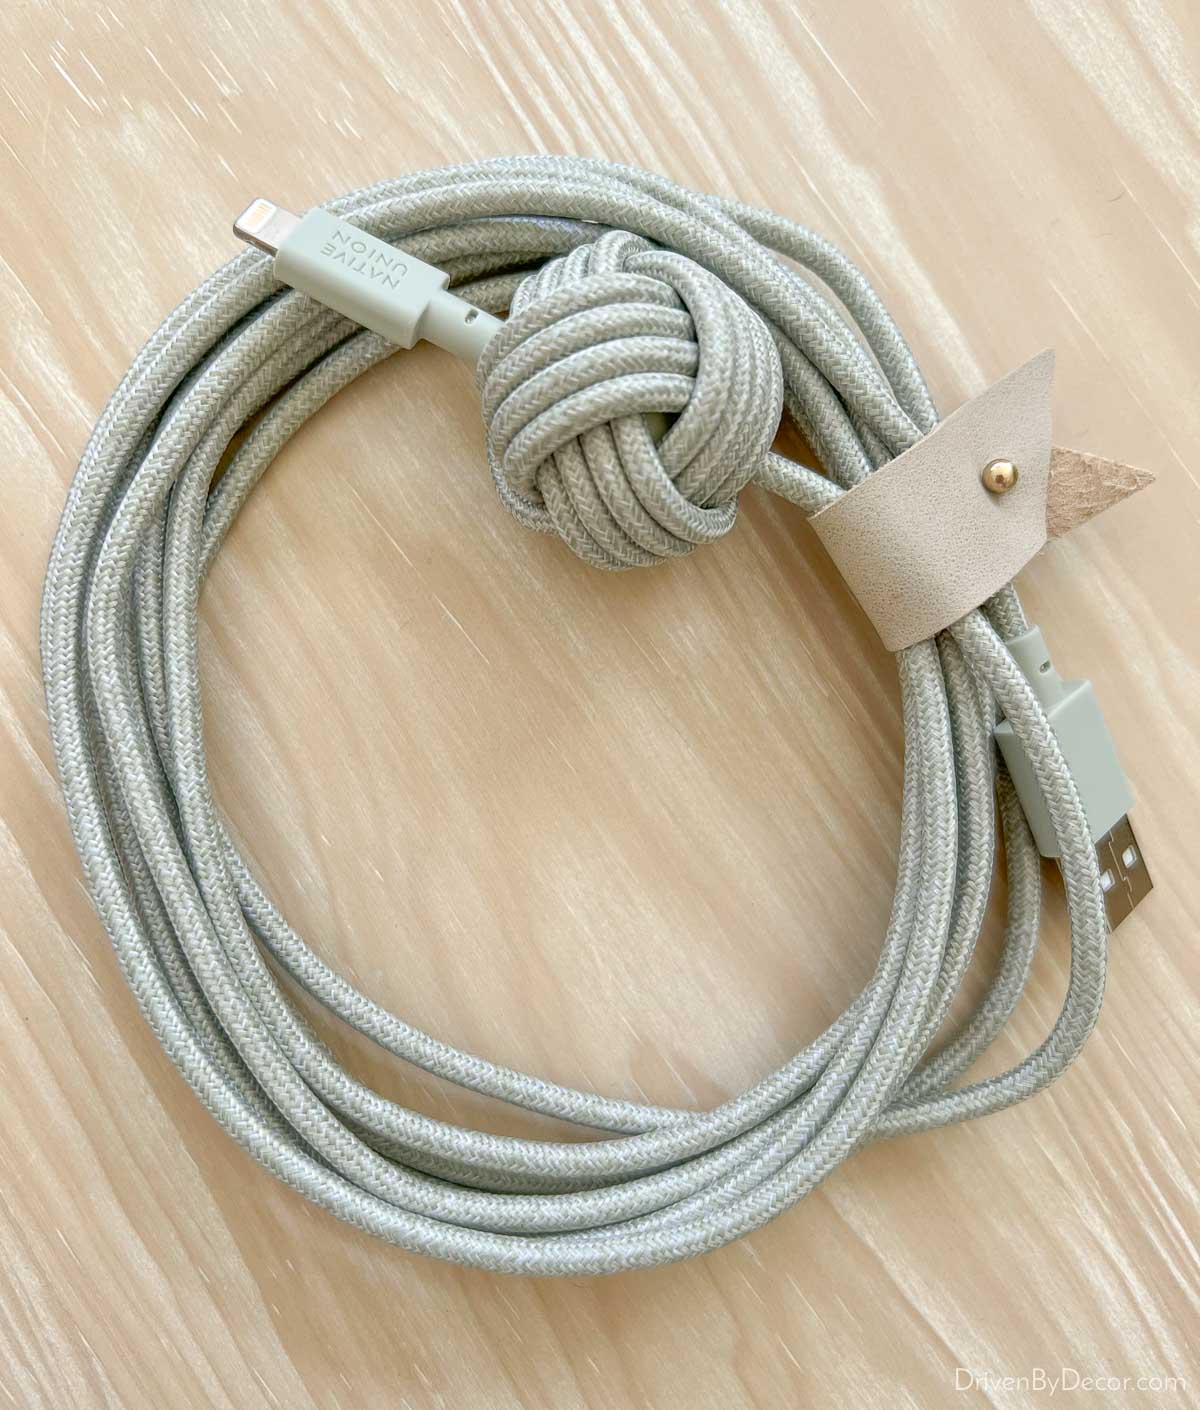 Love this long and sturdy USB cord that reaches even far away outlets!